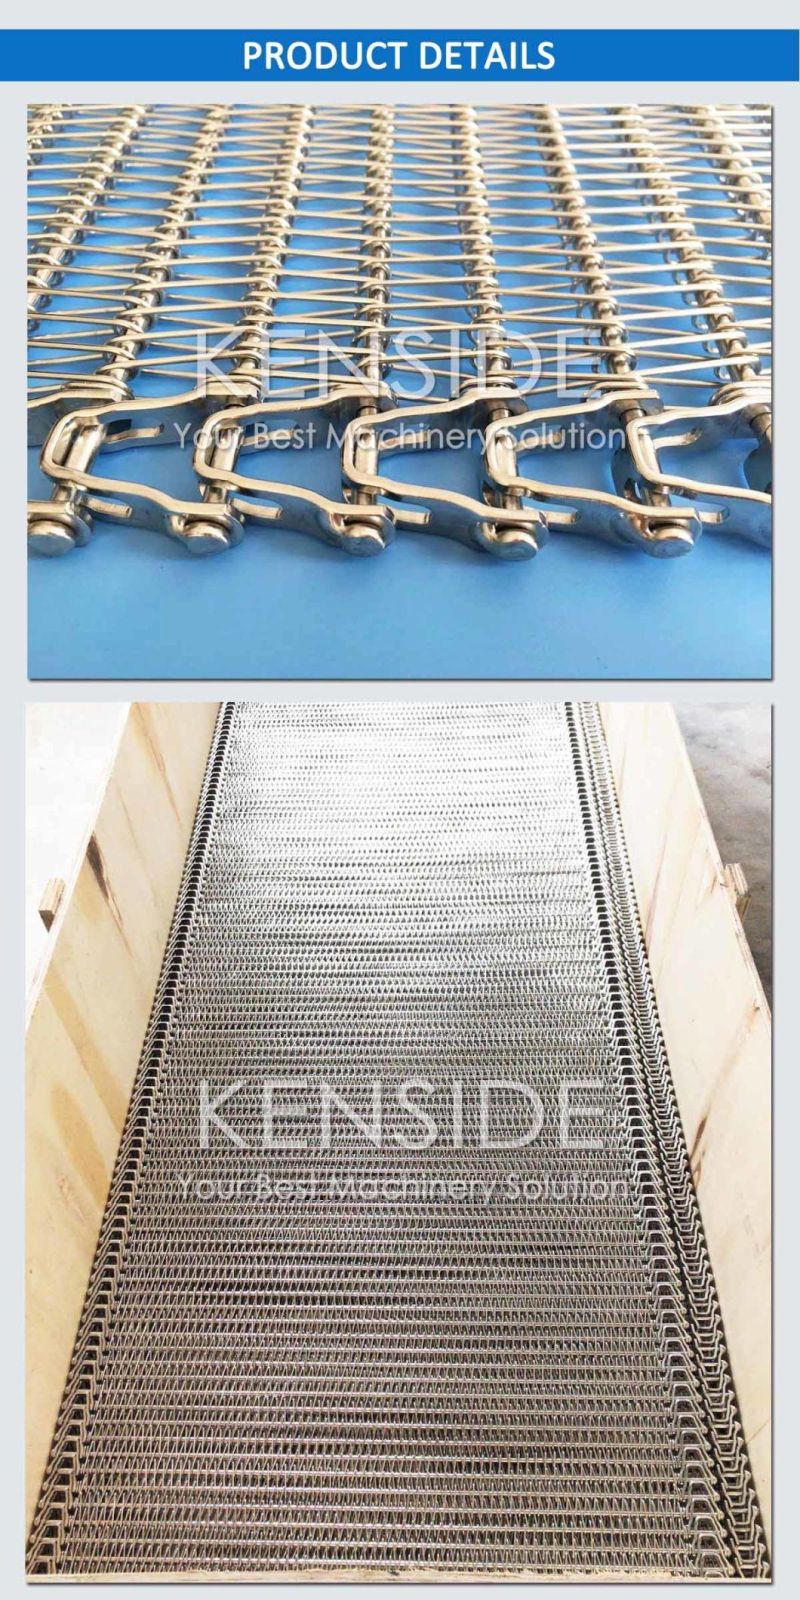 Stainless Steel Belting Spiral Conveyor Belts Reduced Radius Belts for Spiral Coolers, Spiral Freezers